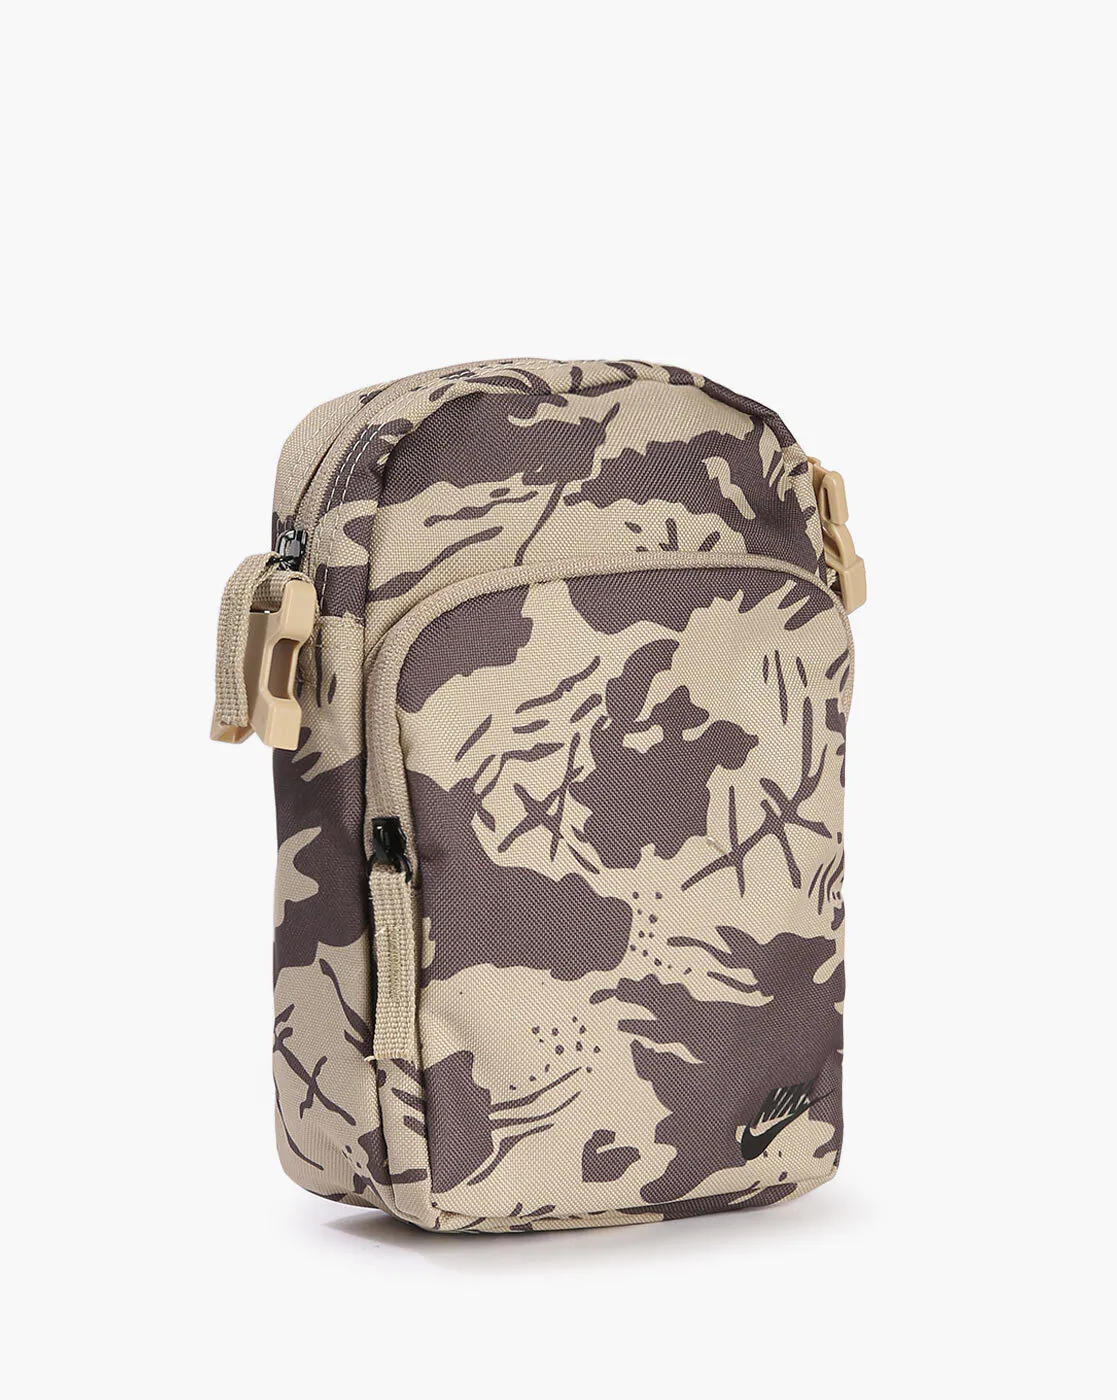 Camouflage Print Crossbody Bag with Detachable Strap -Dq5934-250